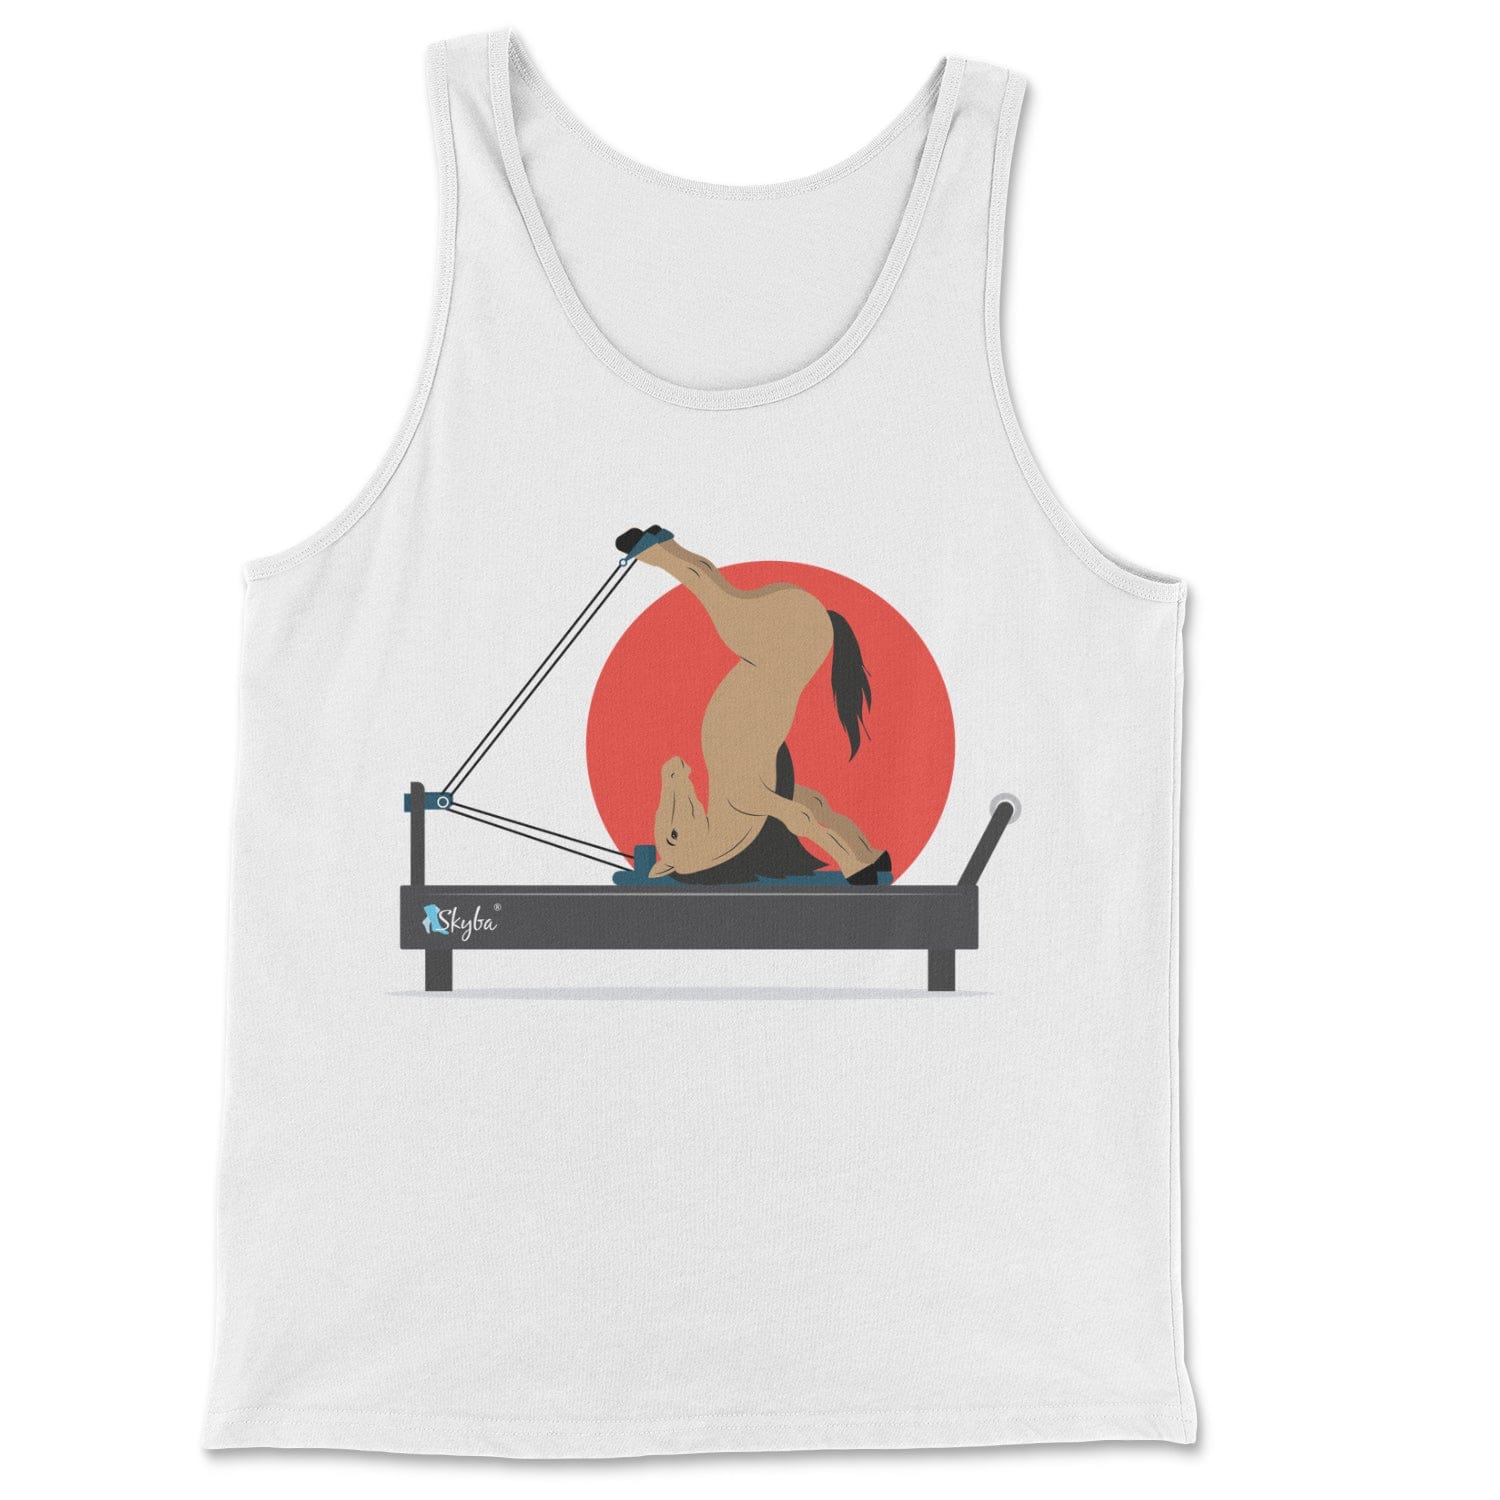 Flexible Horse on the Reformer - Classic Tank Skyba Print Material